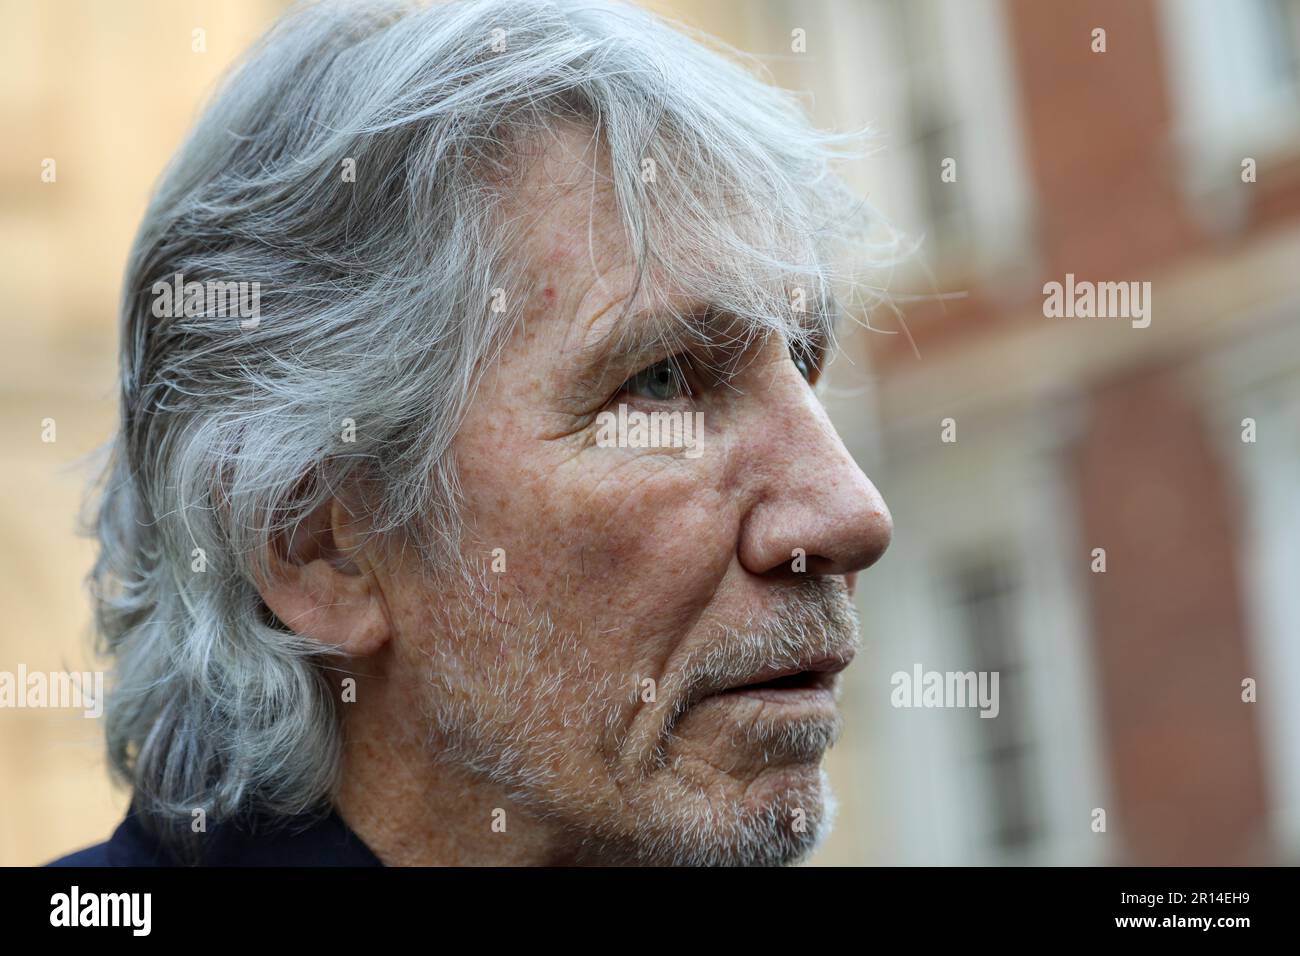 Roger Waters, an English musician who co-founded the hugely successful prog-rock group Pink Floyd, is seen in this 2017 photograph. The singer-songwri Stock Photo